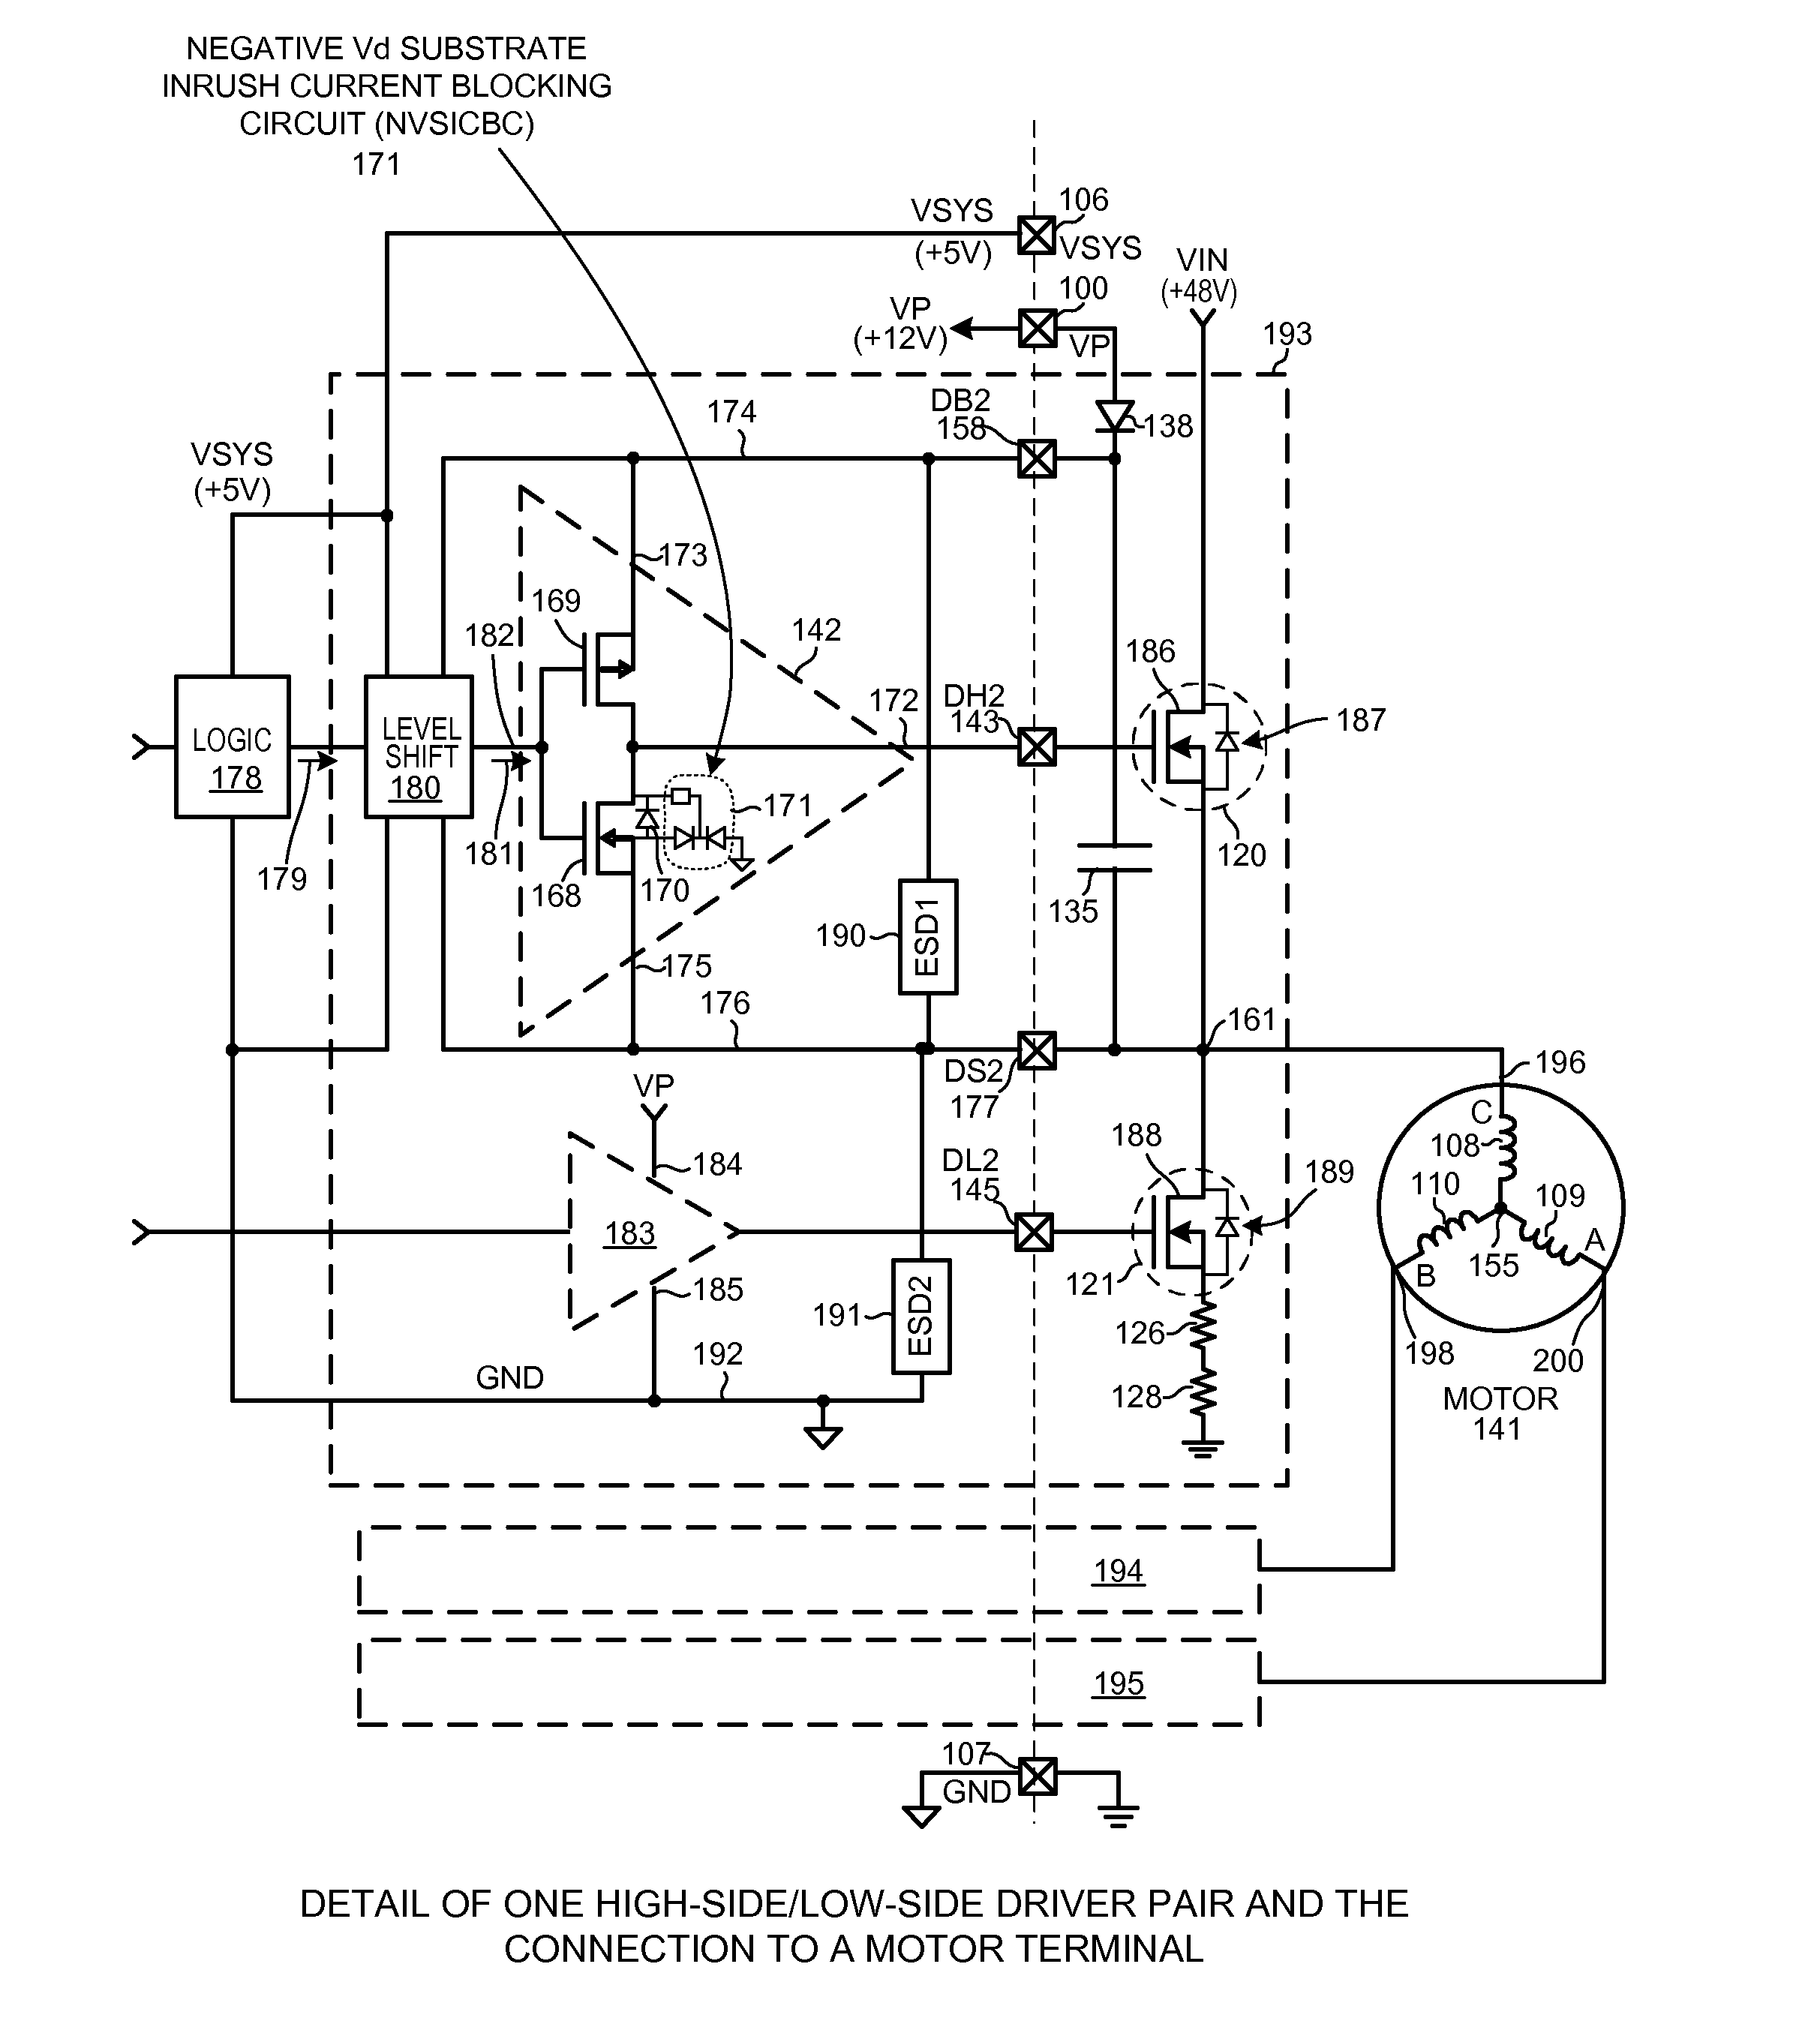 Power Management Integrated Circuit for Driving Inductive Loads